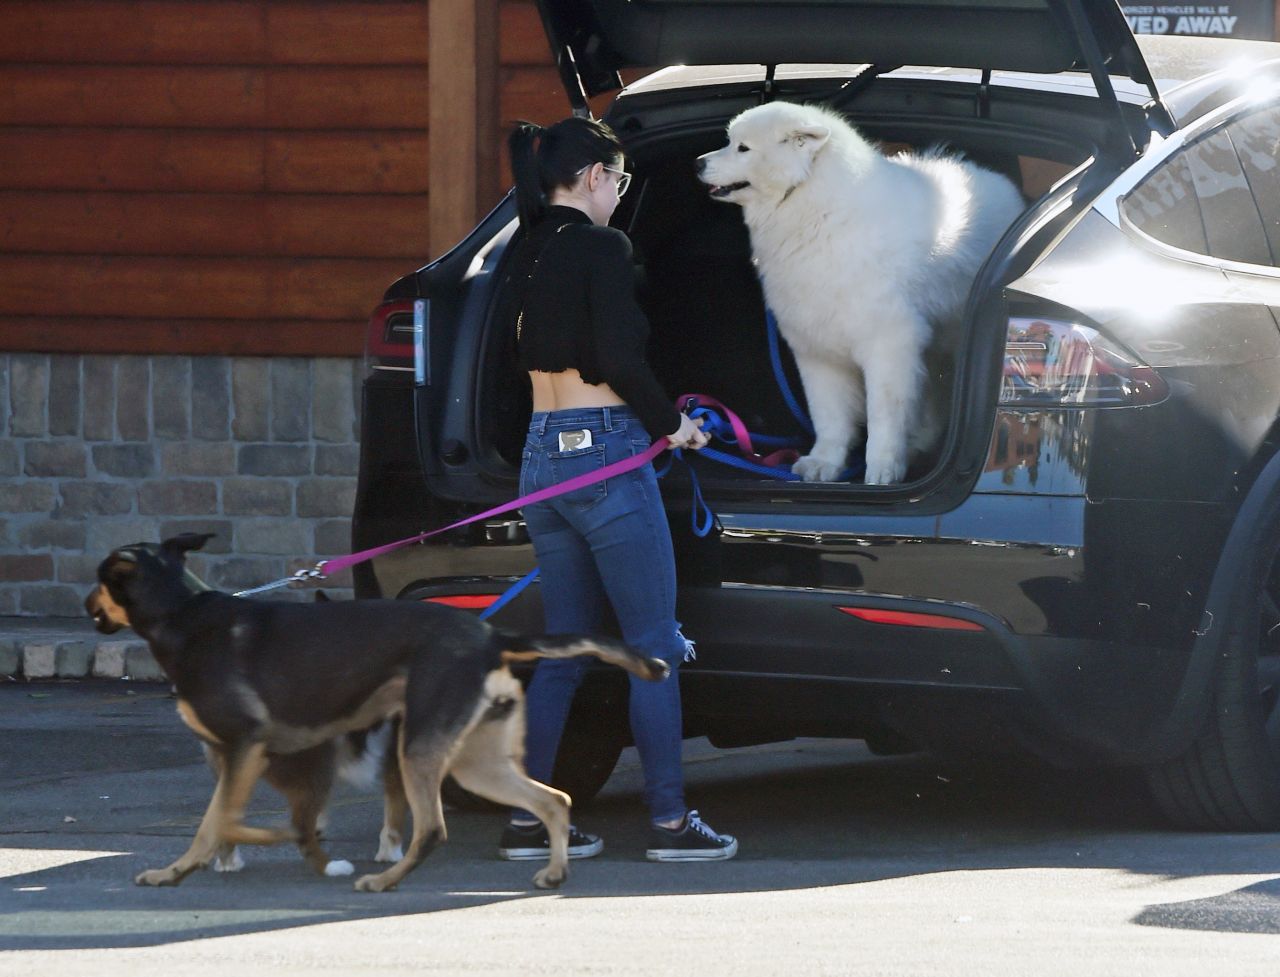 ariel-winter-and-levi-meaden-take-their-dogs-to-the-veterinarian-in-la-12-30-2018-7.jpg